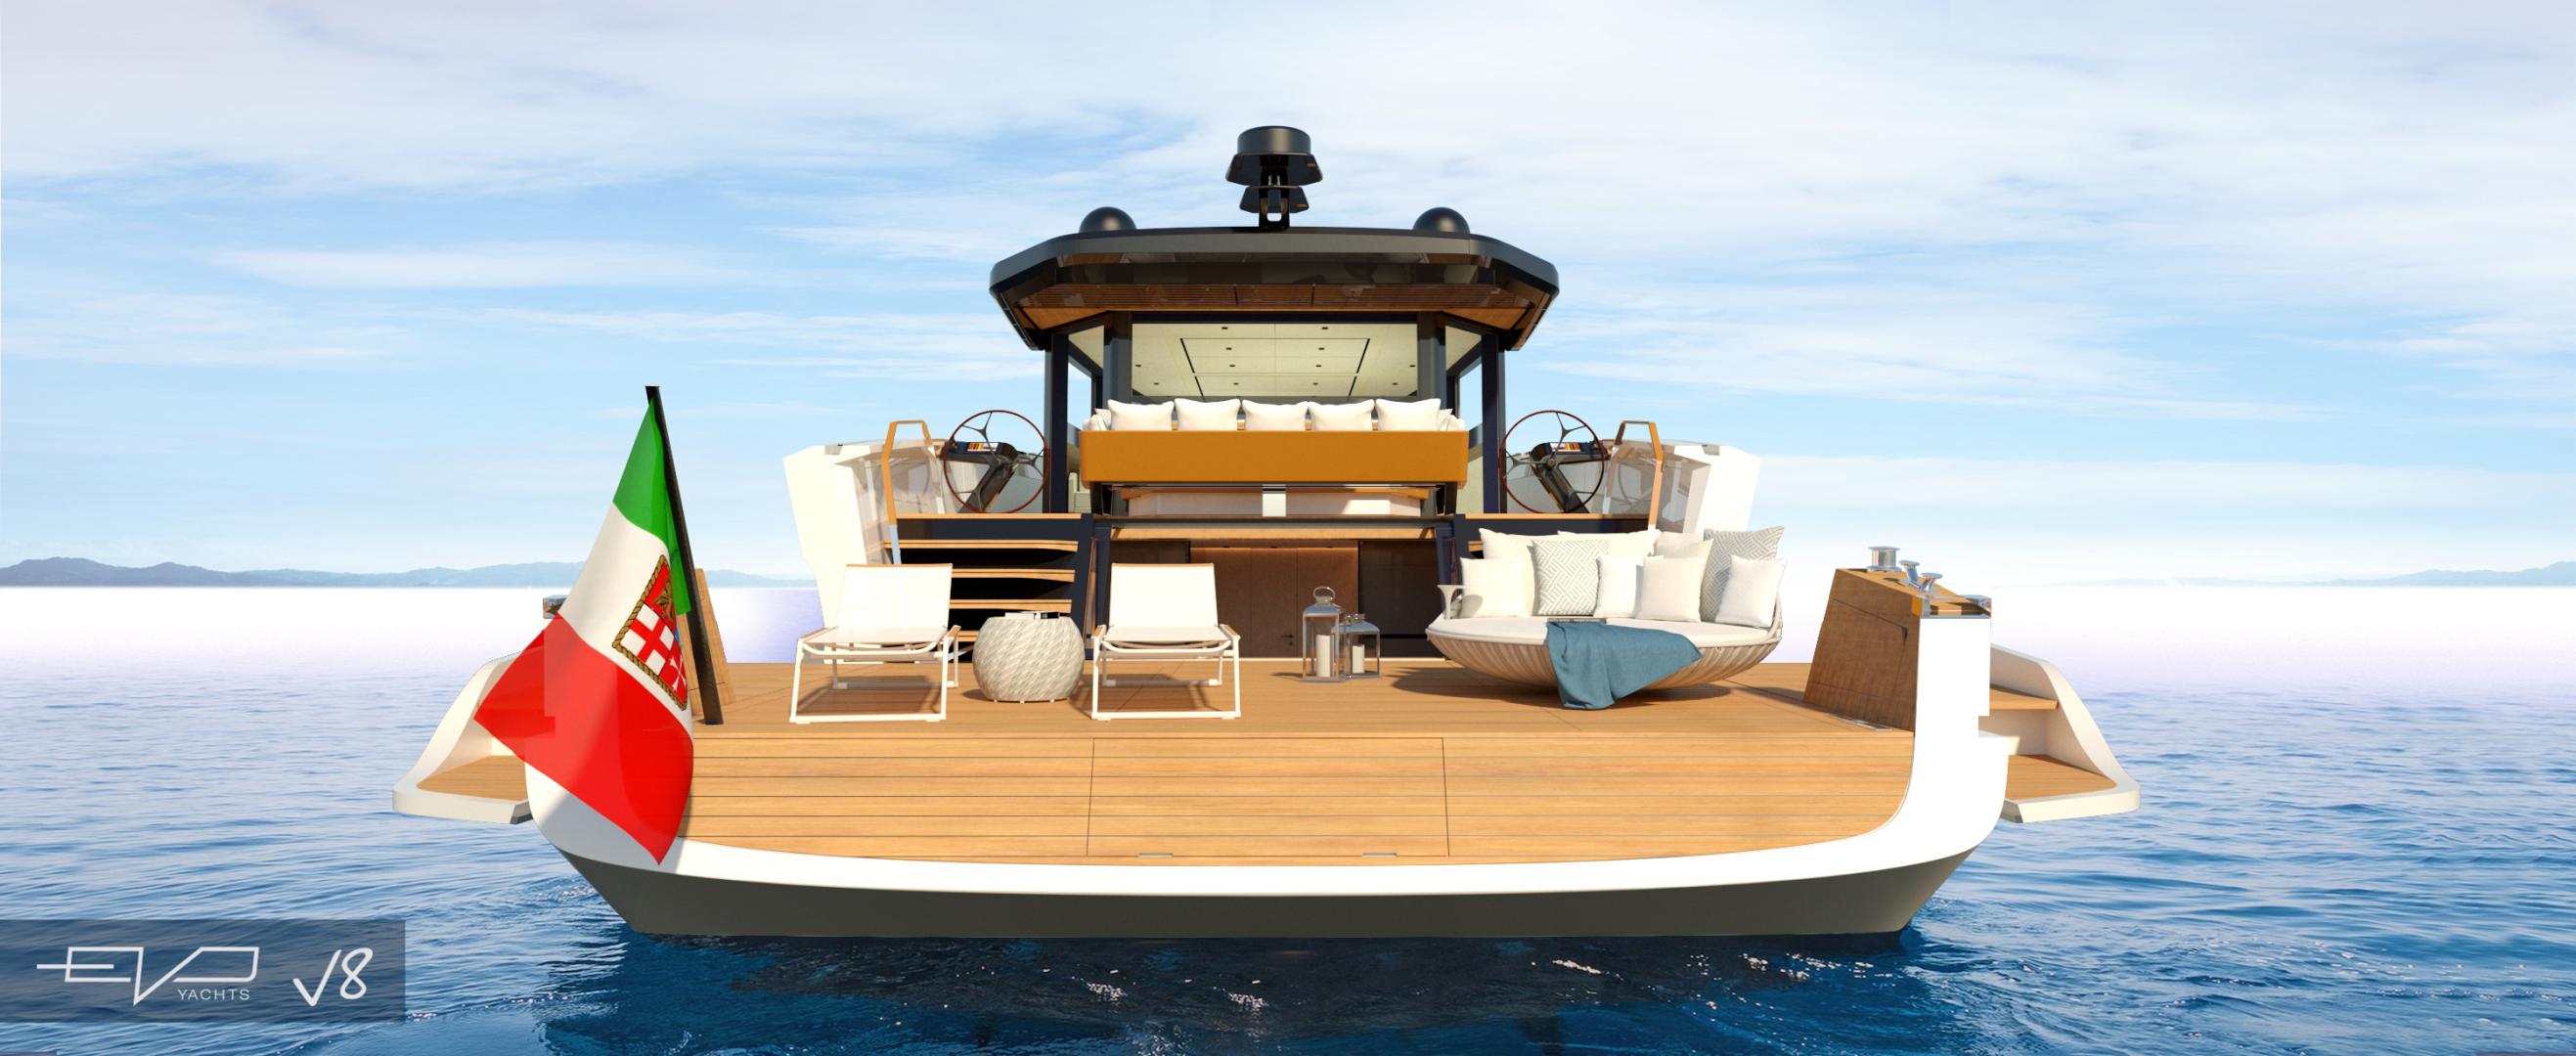 Evo Yachts’ exclusive new flagship, today officially named Evo V8